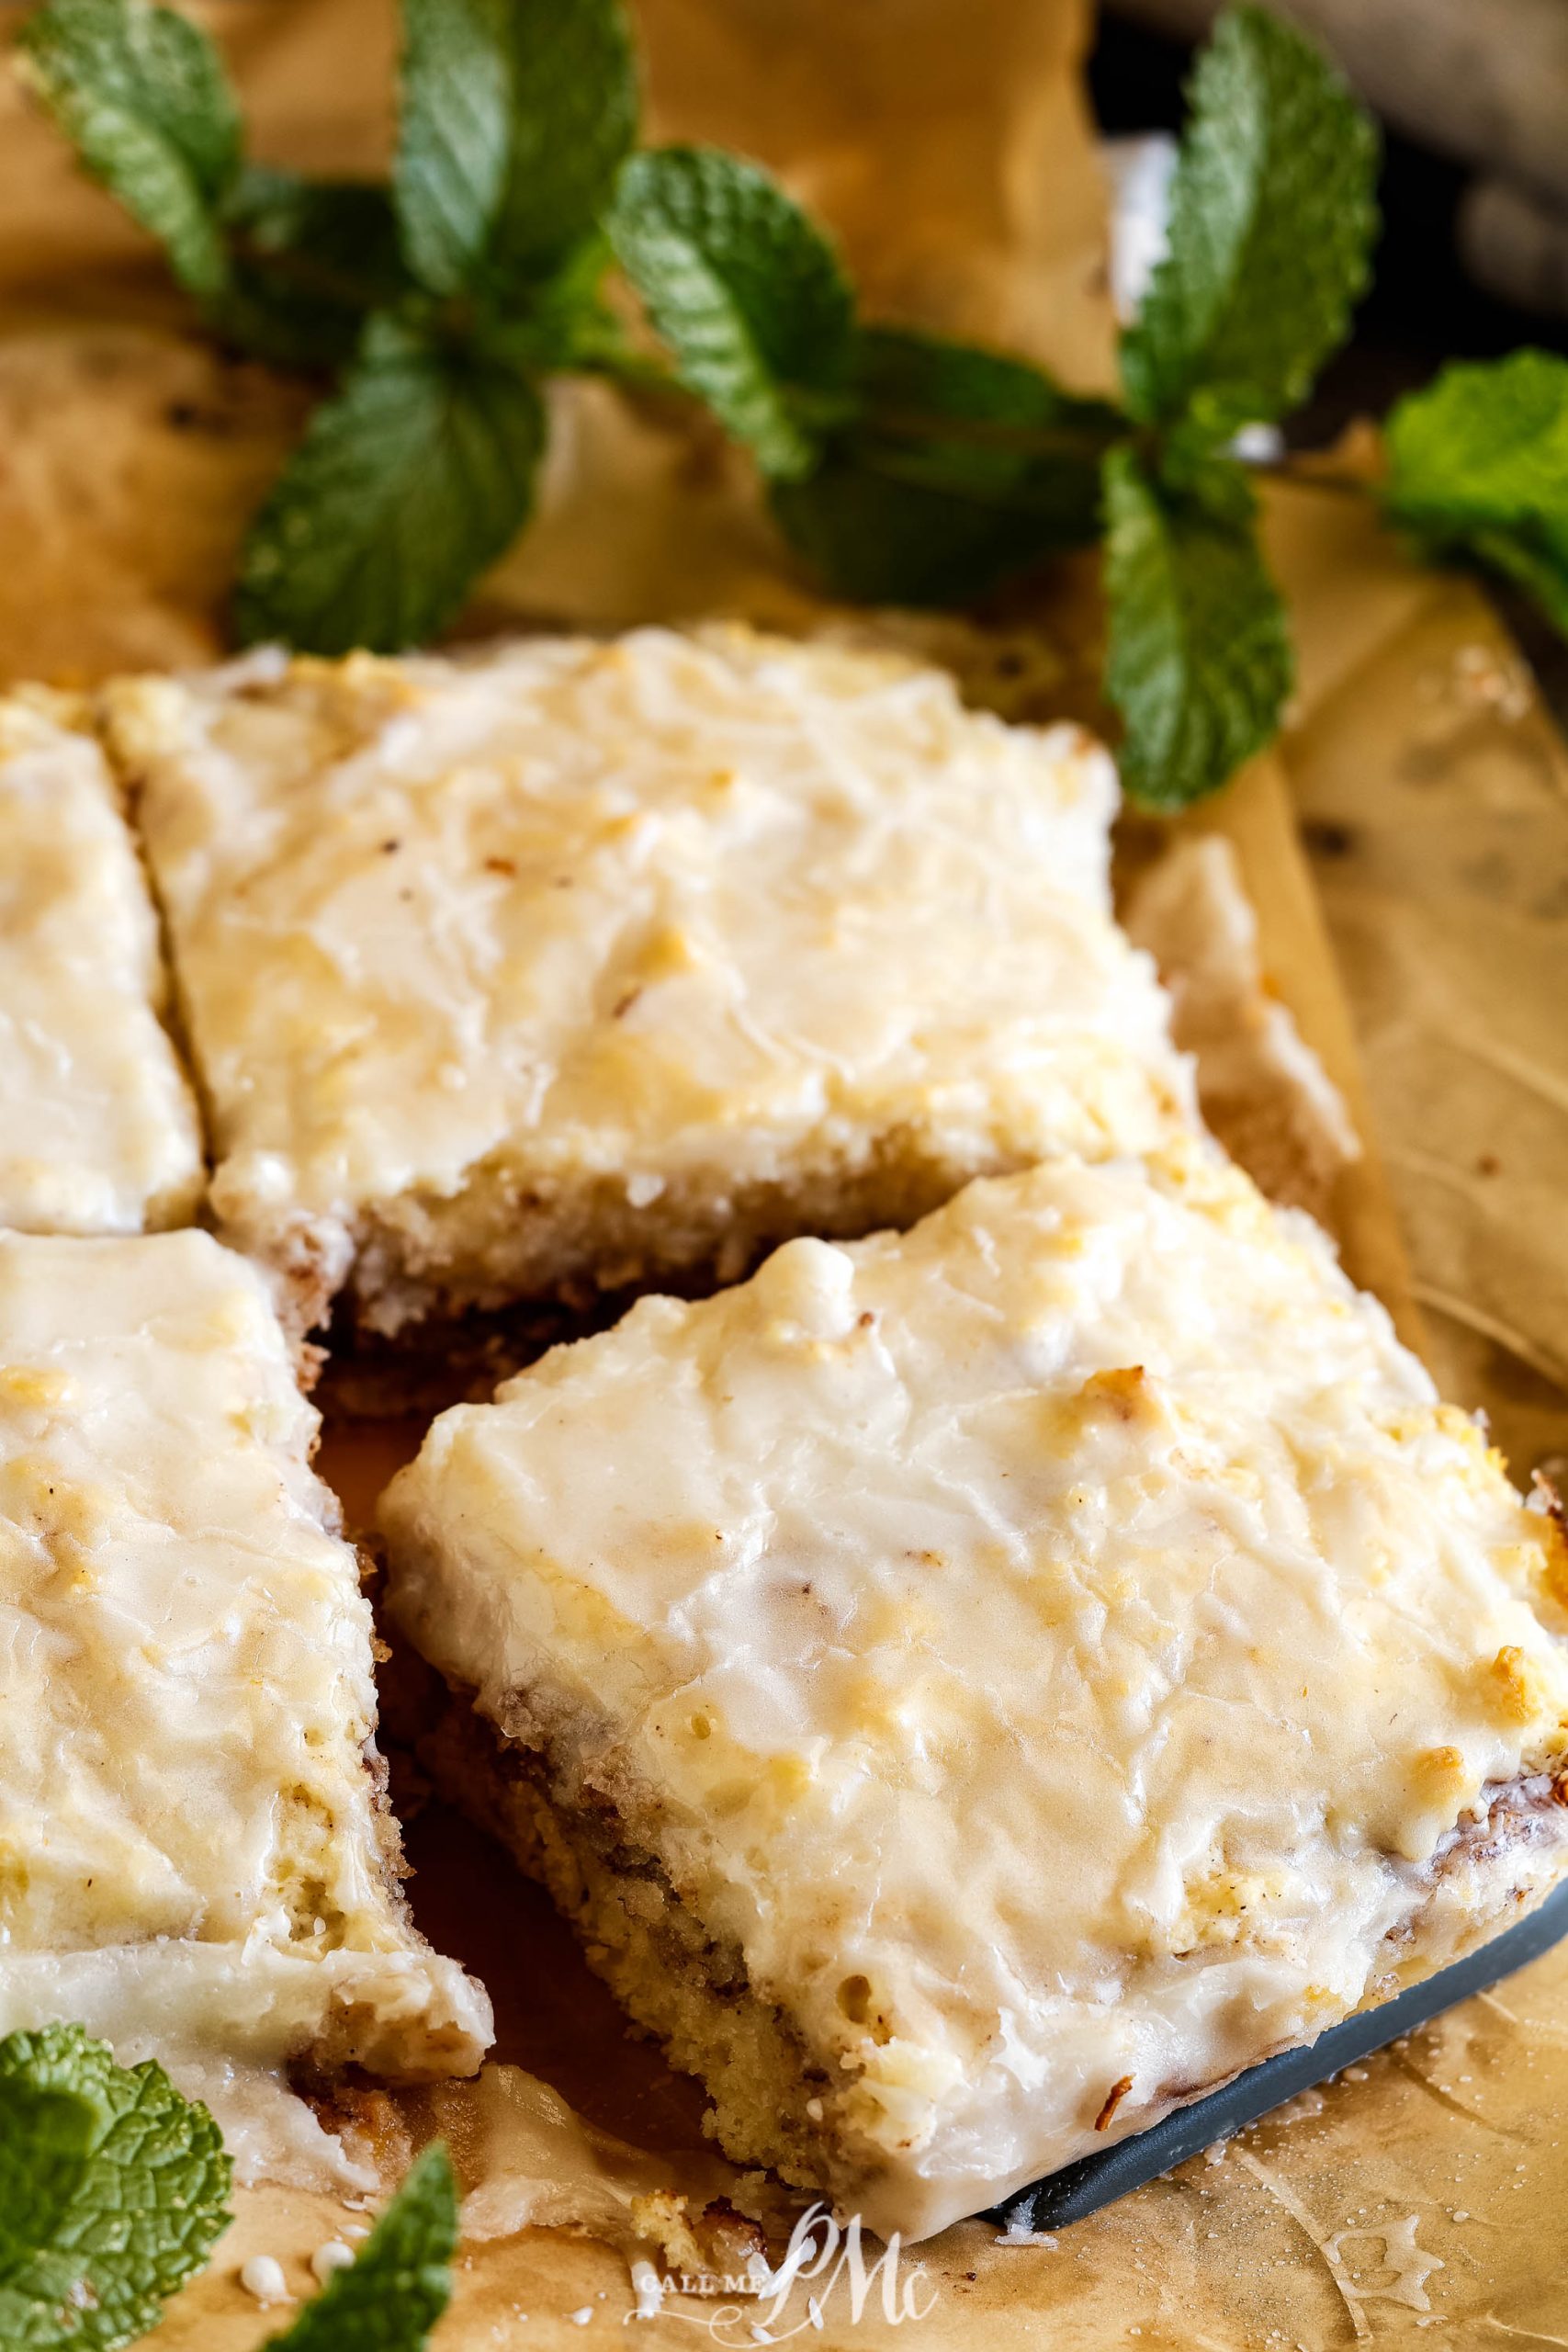 Lemon bars with icing and mint leaves on a baking sheet, in addition to cinnamon rolls.